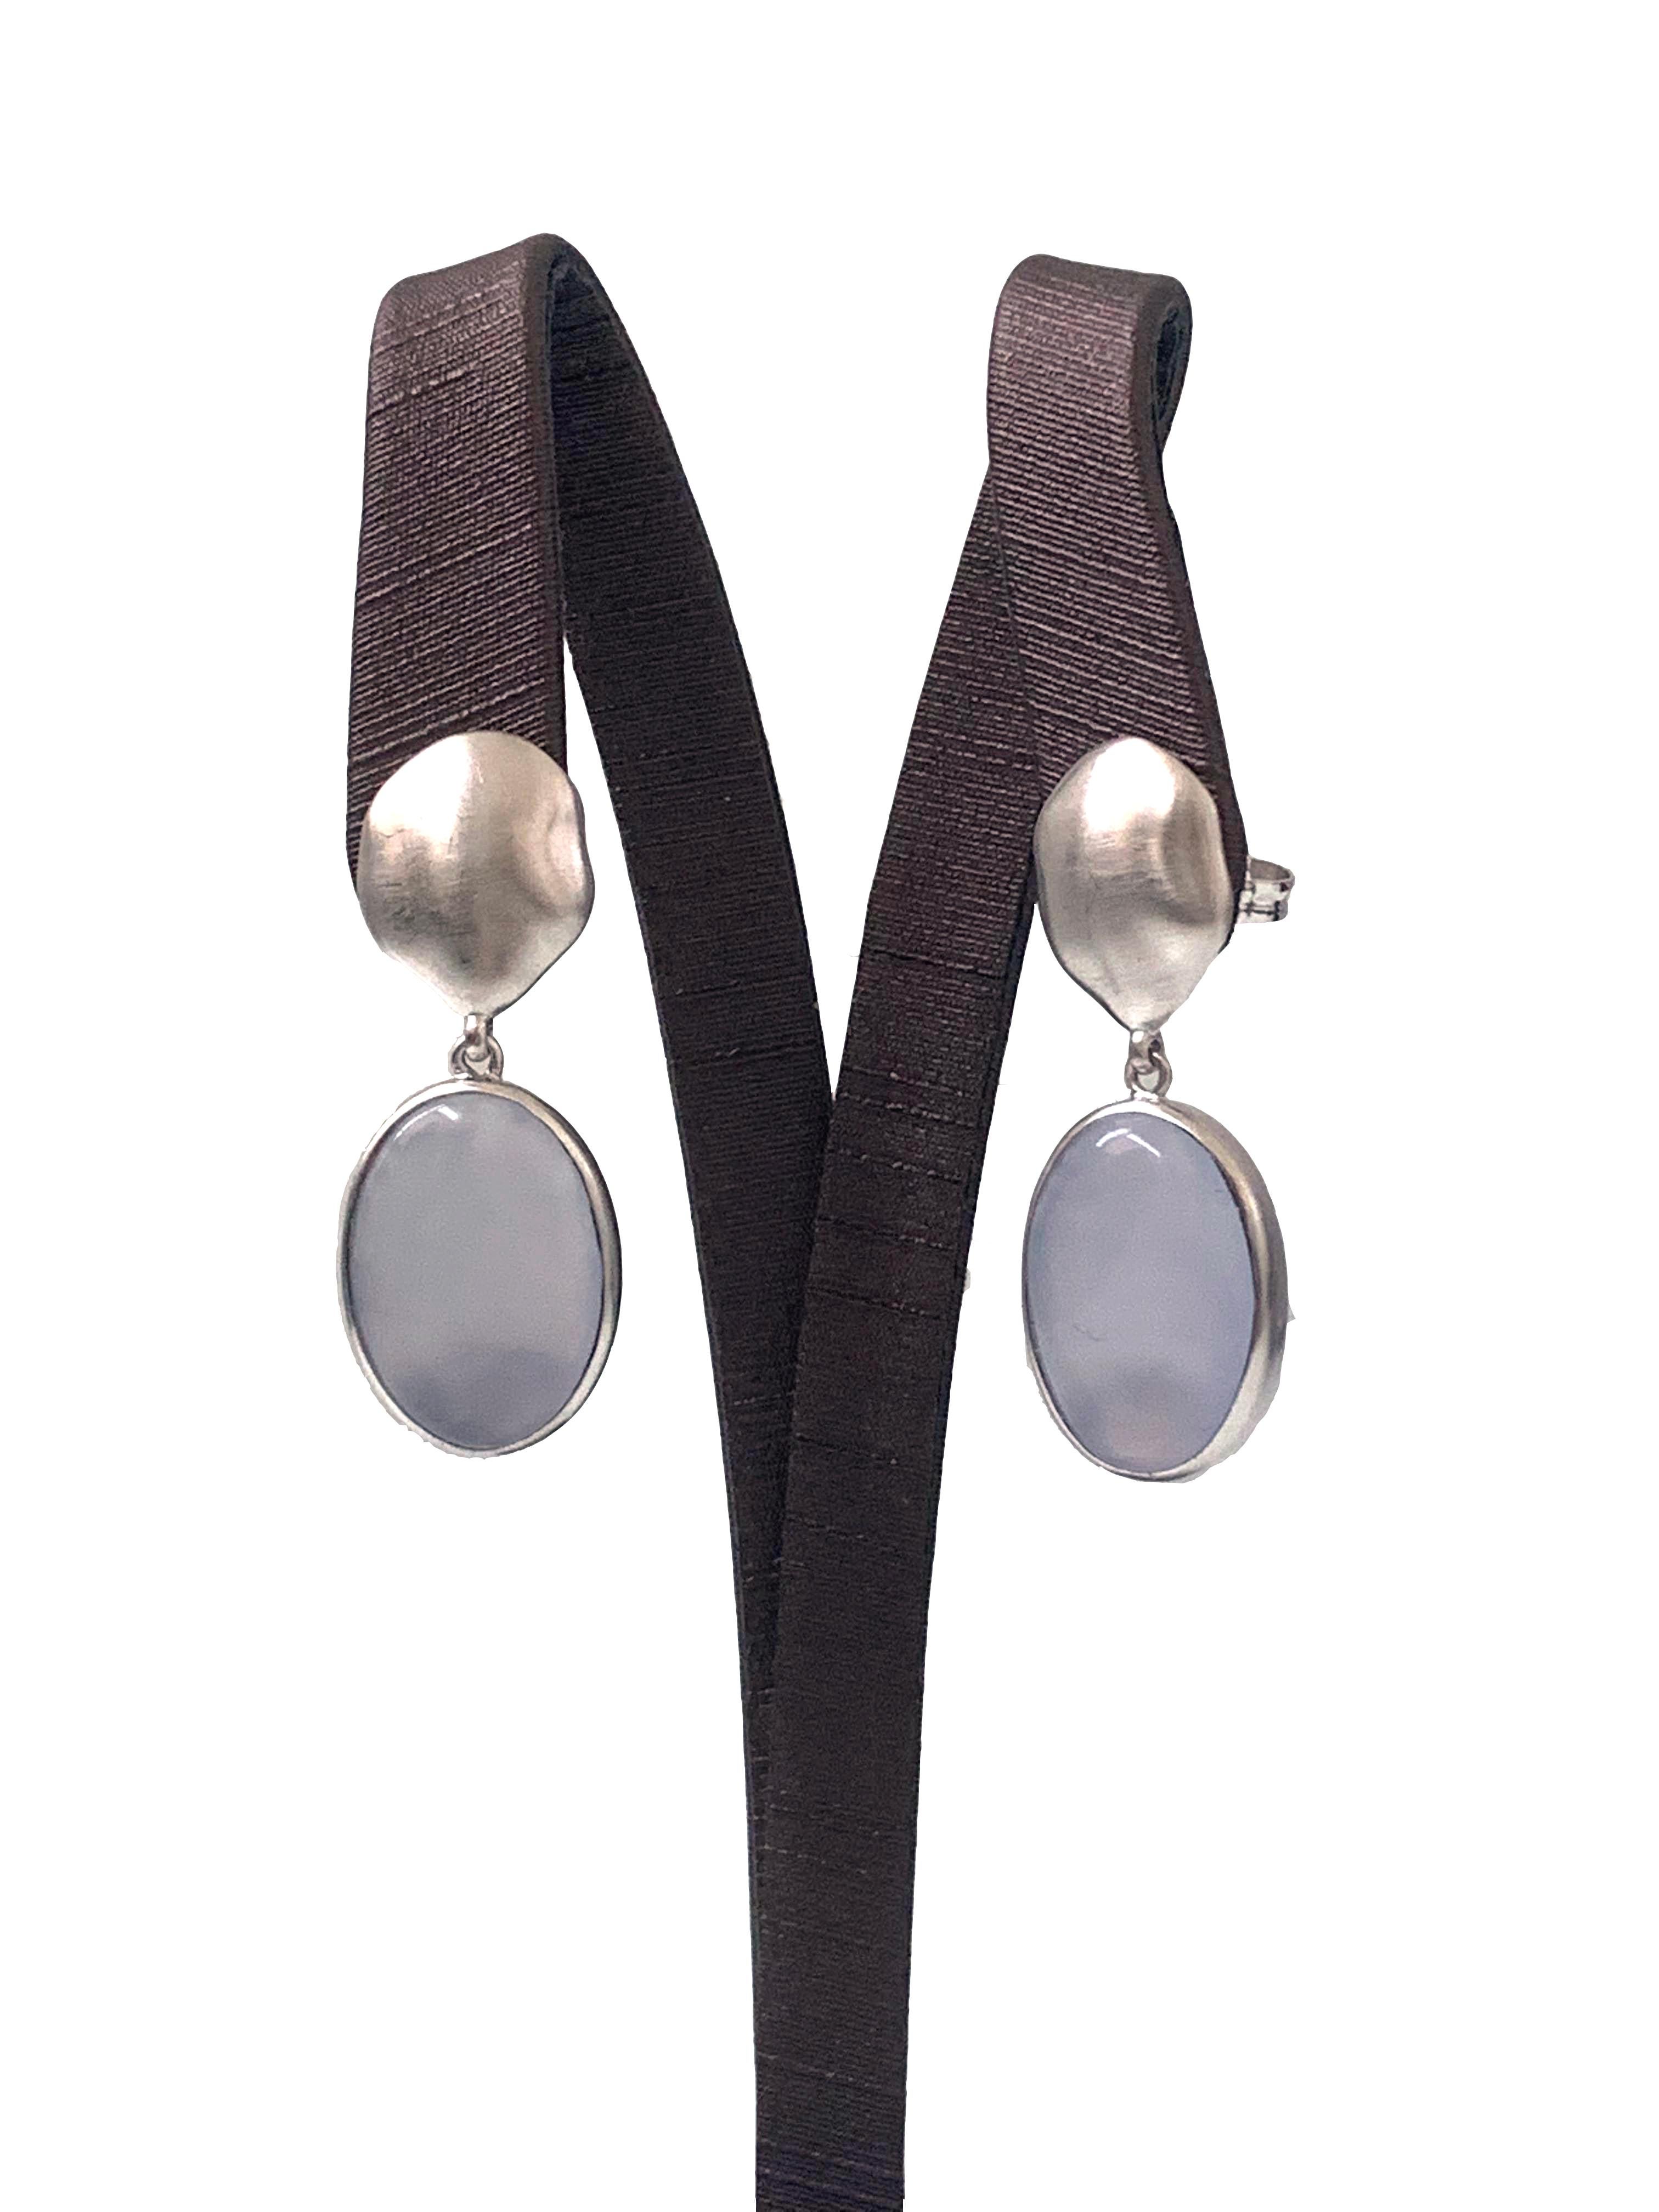 Discover oval Chalcedony drop earrings. The earrings feature 2 large oval-shape cabochon-cut Chalcedony with unique periwinkle purple-ish blue hue, handcrafted brushed satin texturing technique, and hand set in platinum rhodium plated sterling